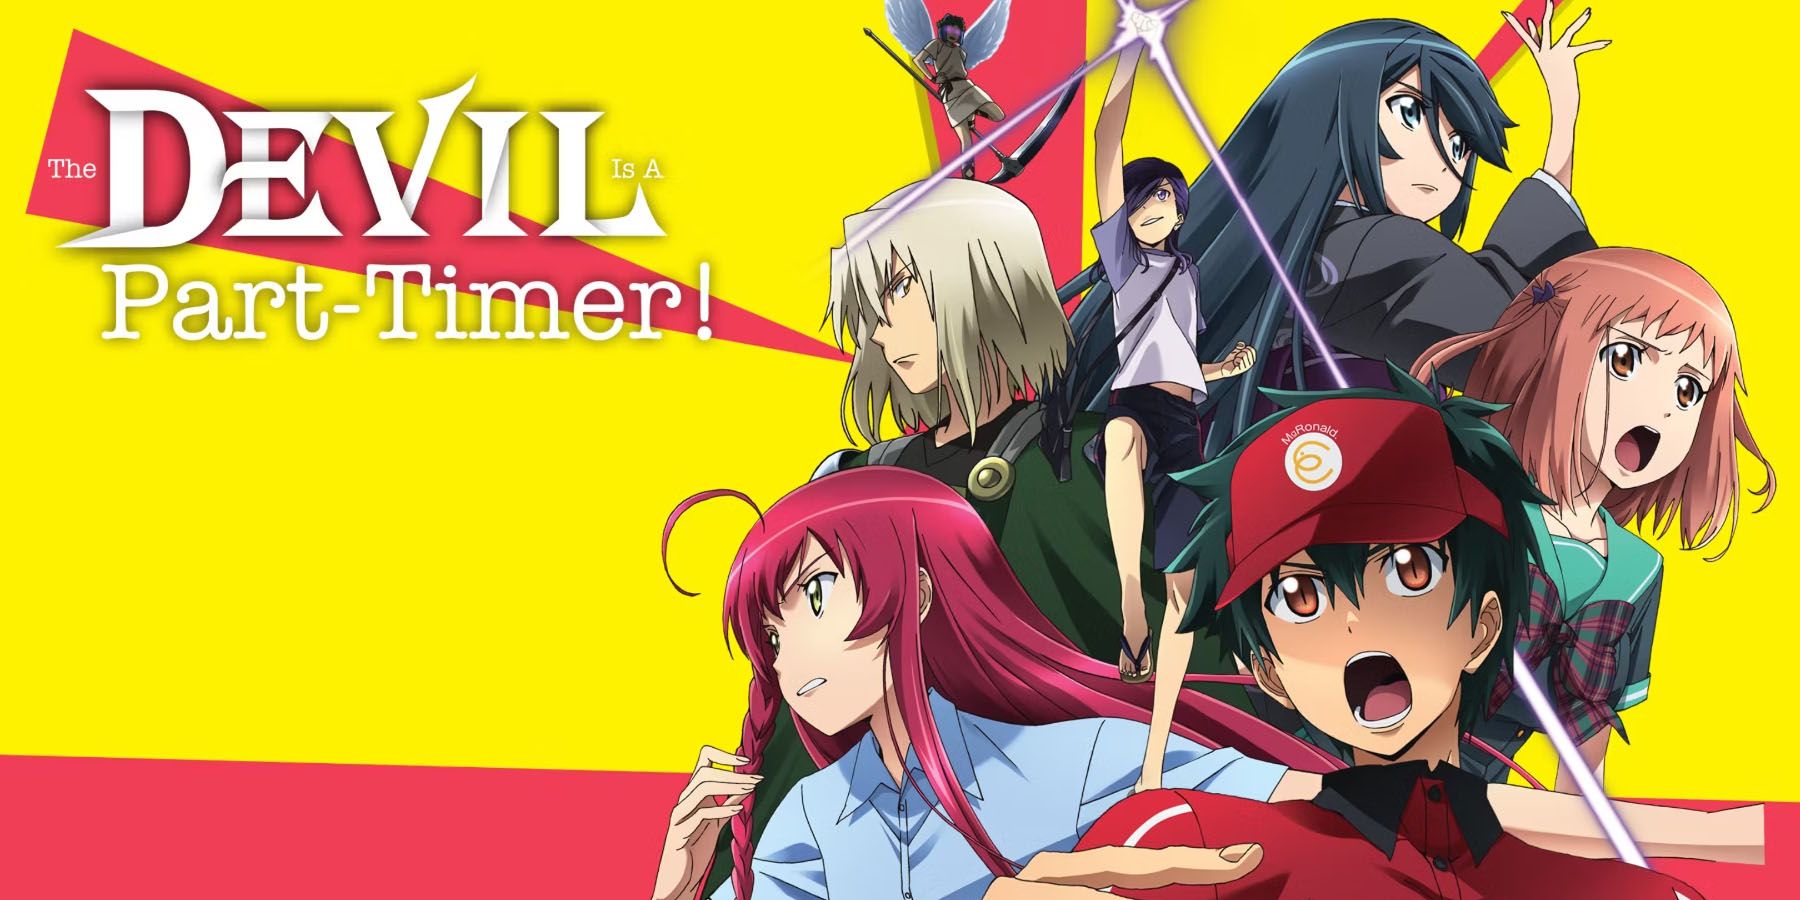 A collection of characters in The Devil is a Part-Timer